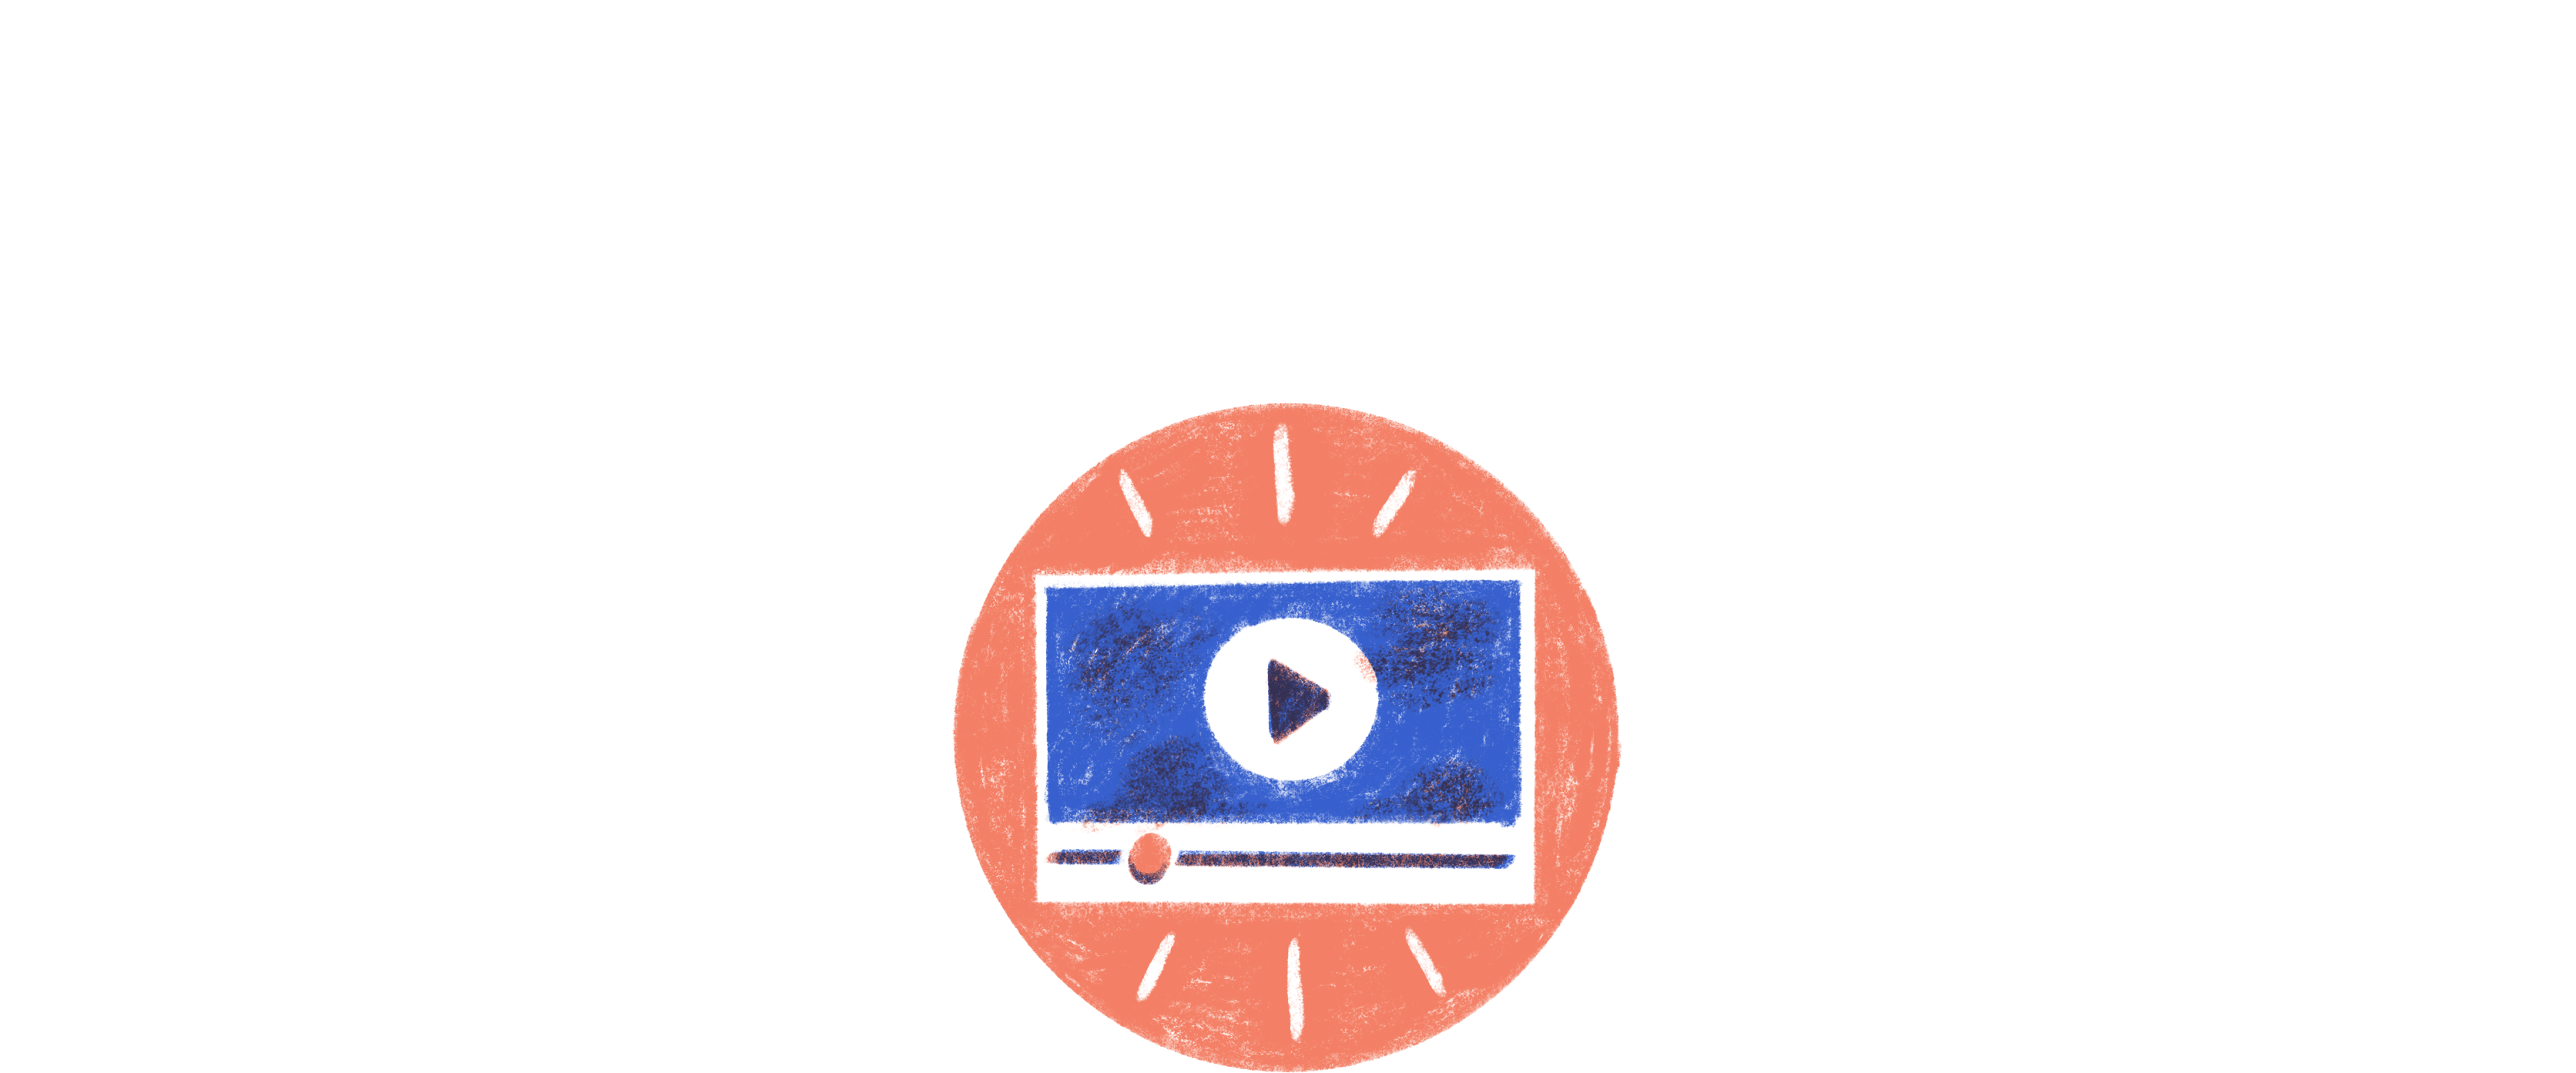 Illustration of a video player